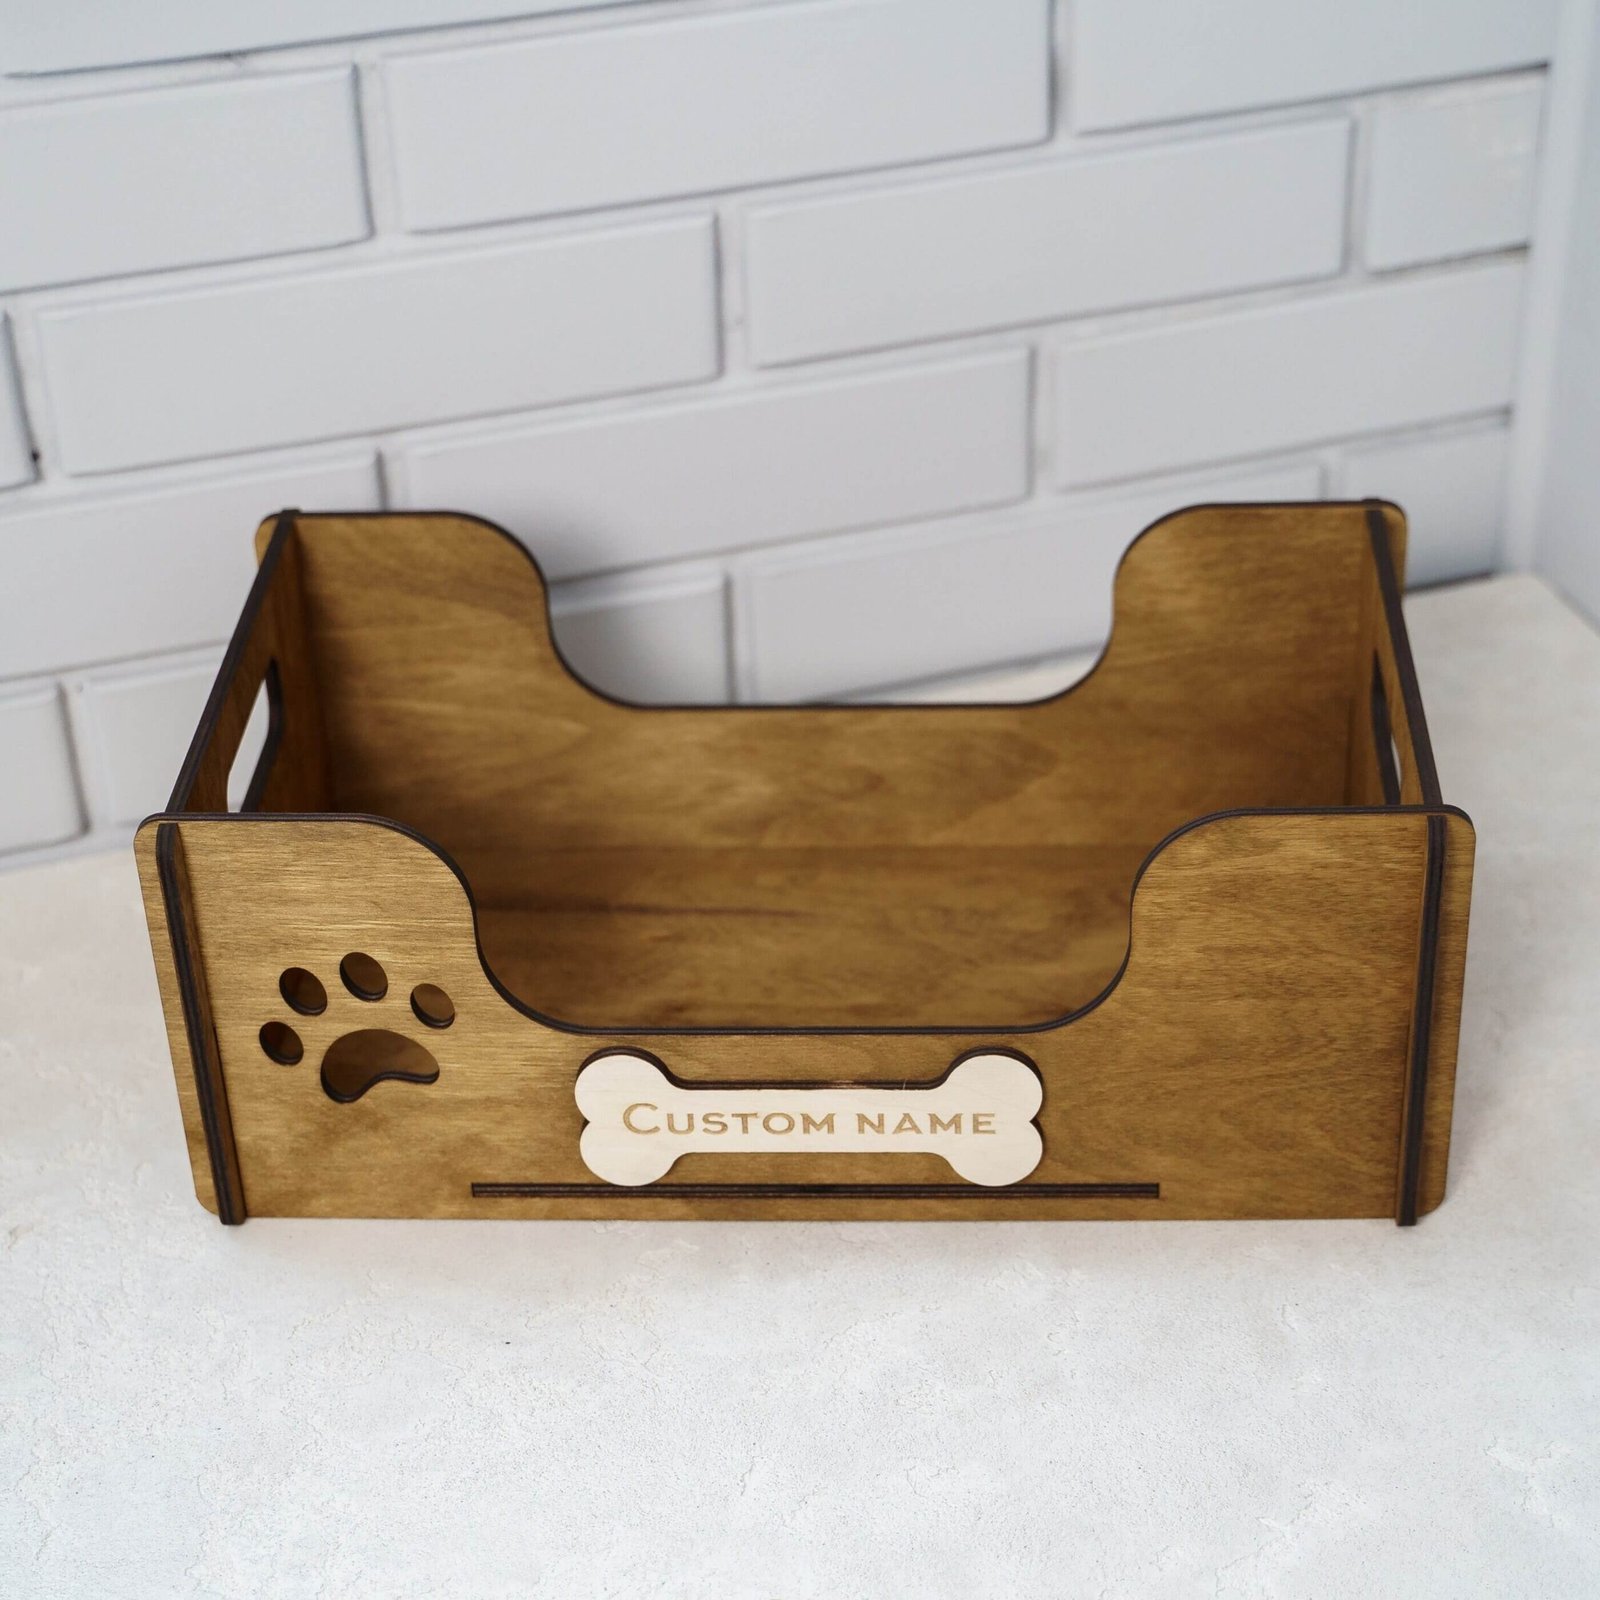 Factors to consider when choosing a personalised dog toy box